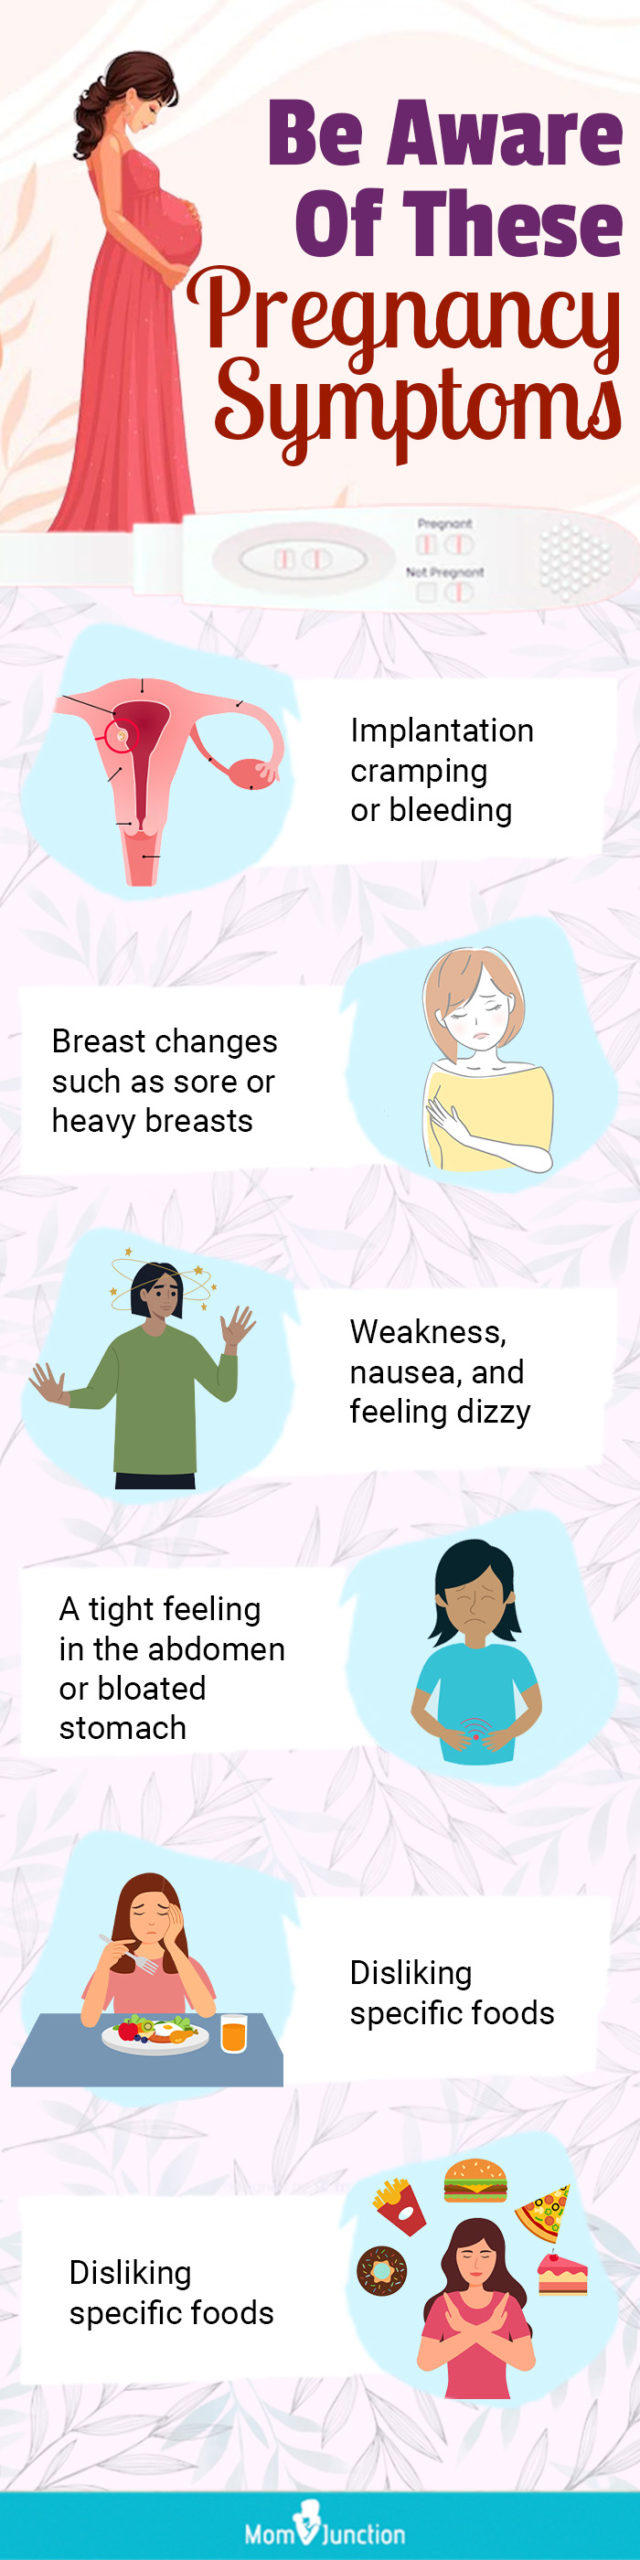 be aware of these pregnancy symptoms [infographic]